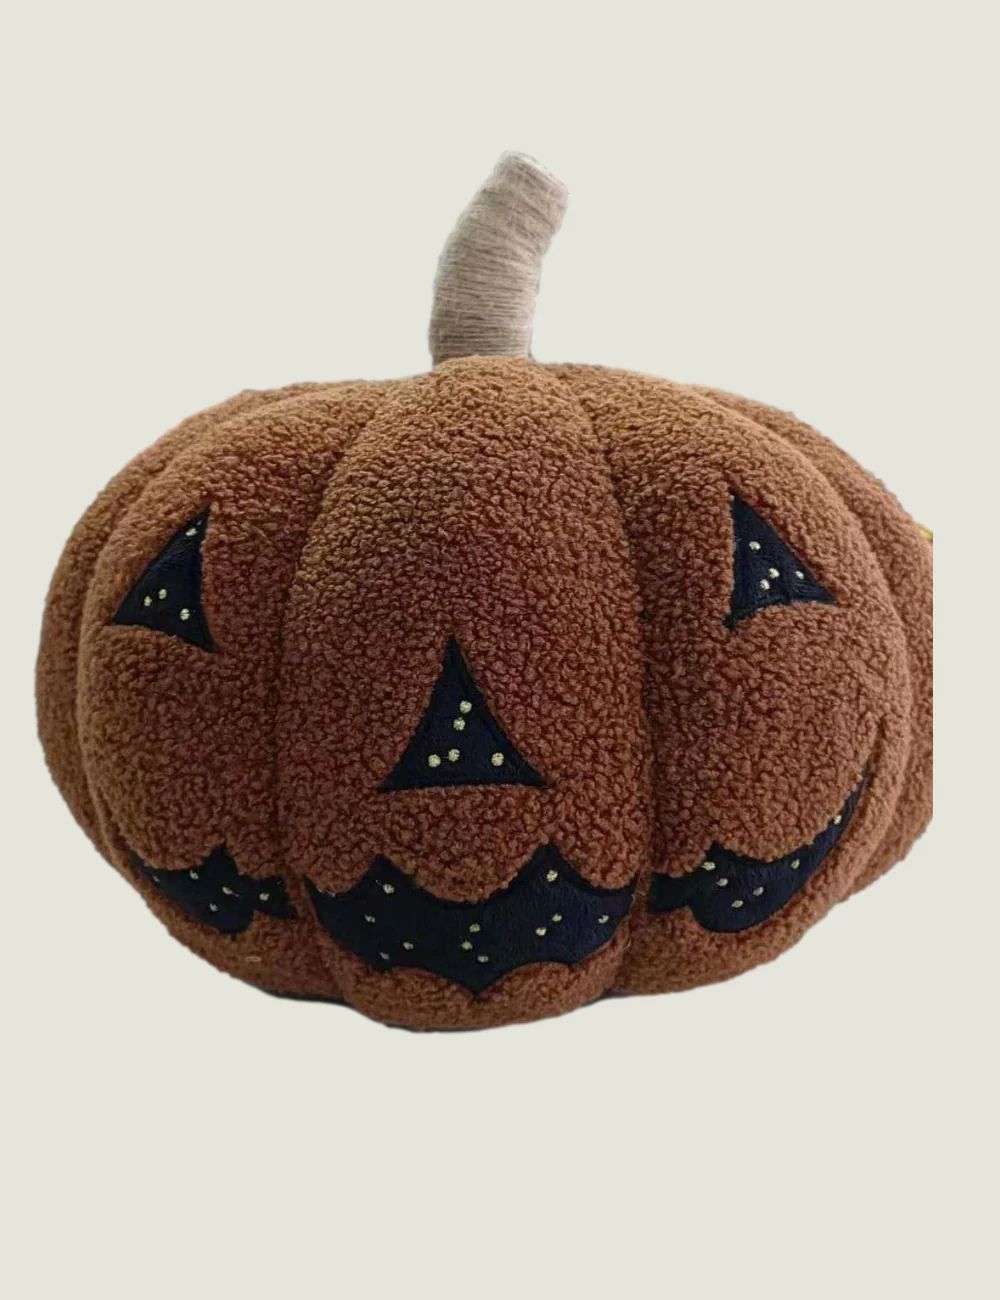 TSC x Tia Booth: Jack-o'-lantern 3D Shaped Pillow | The Styled Collection